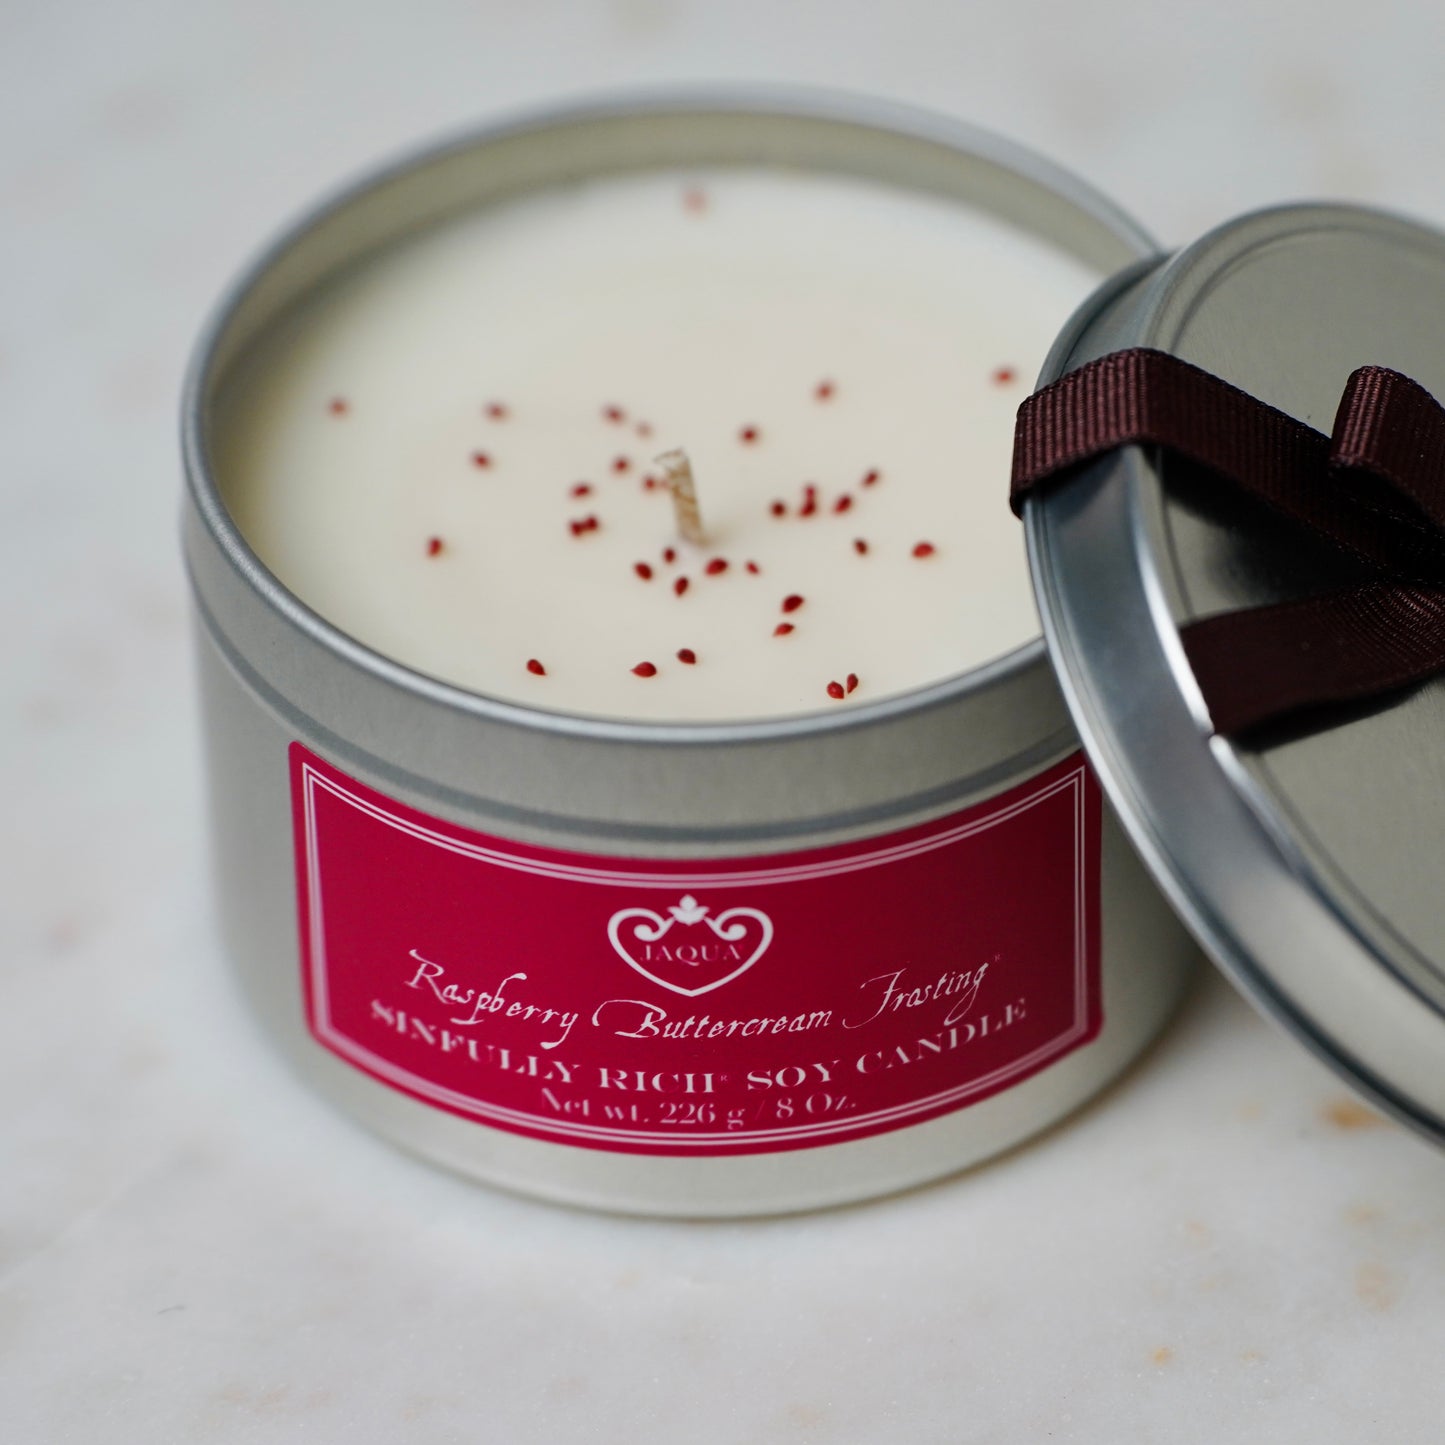 Raspberry Buttercream Frosting Soy Candle